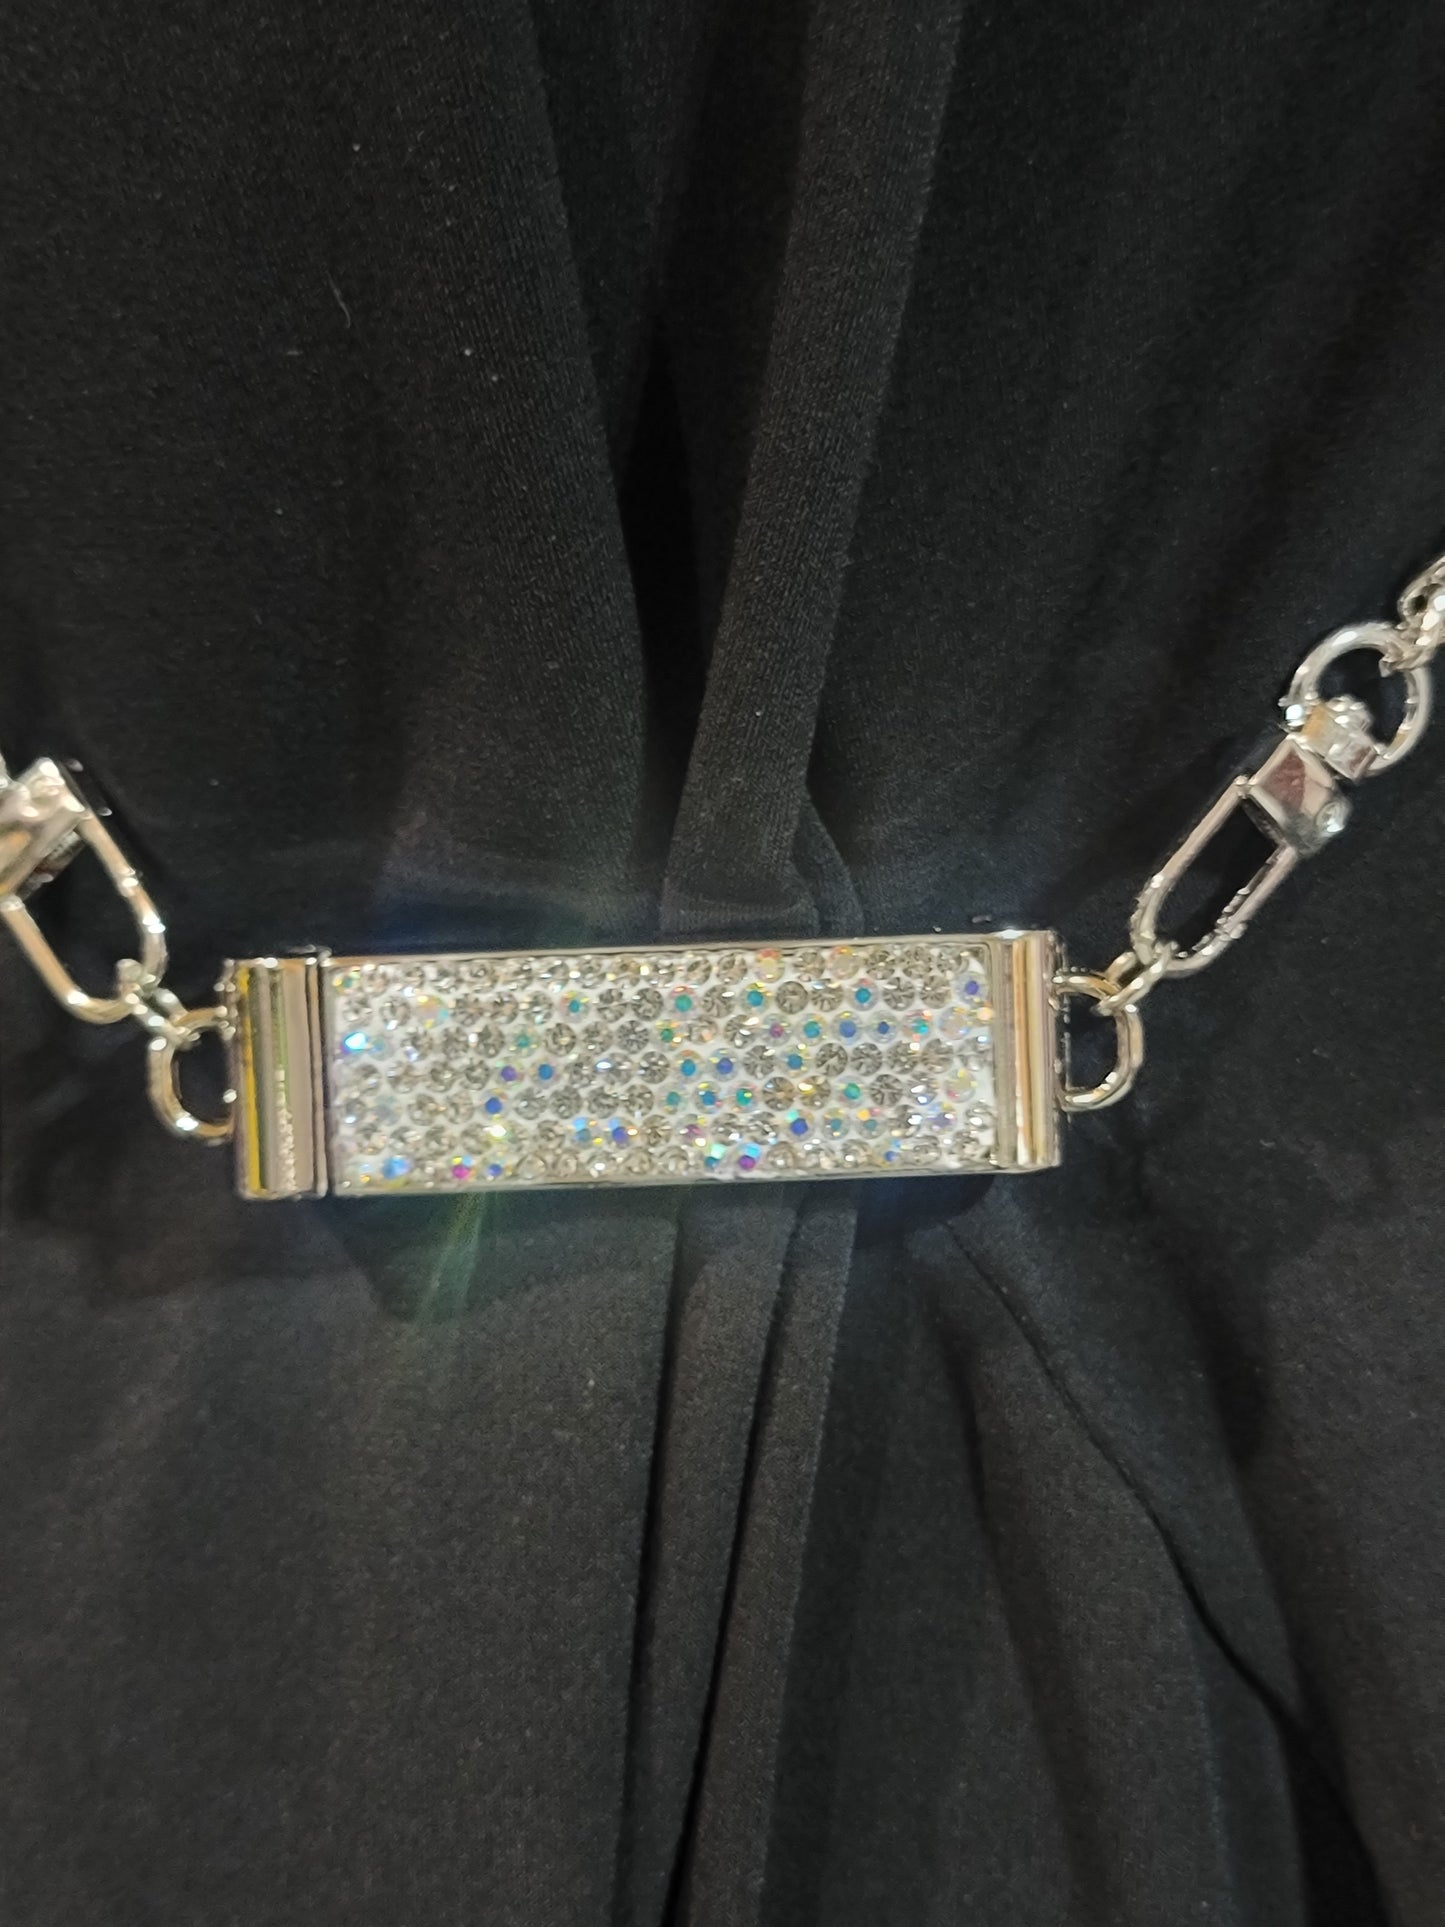 Jamison Rhinestone Cell Phone Holder with Chain Strap